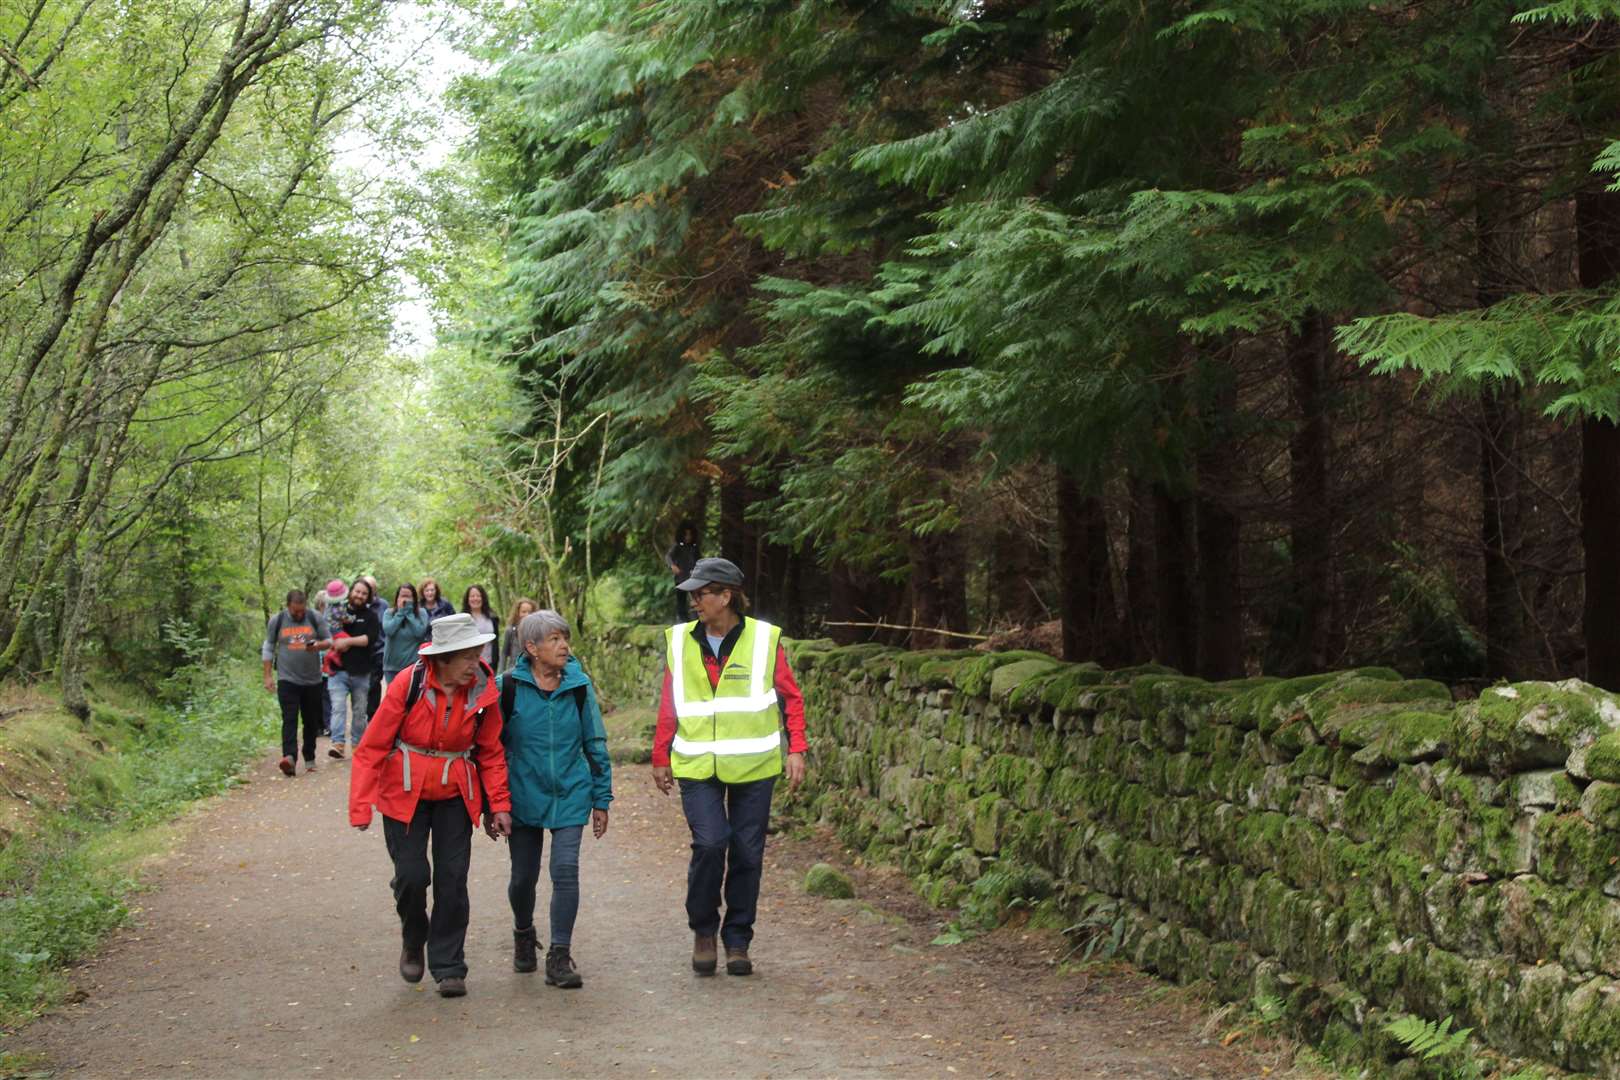 Some of the visitors enjoying the sights and sounds along the Colony trail on Bennachie on Saturday. Picture: Griselda McGregor